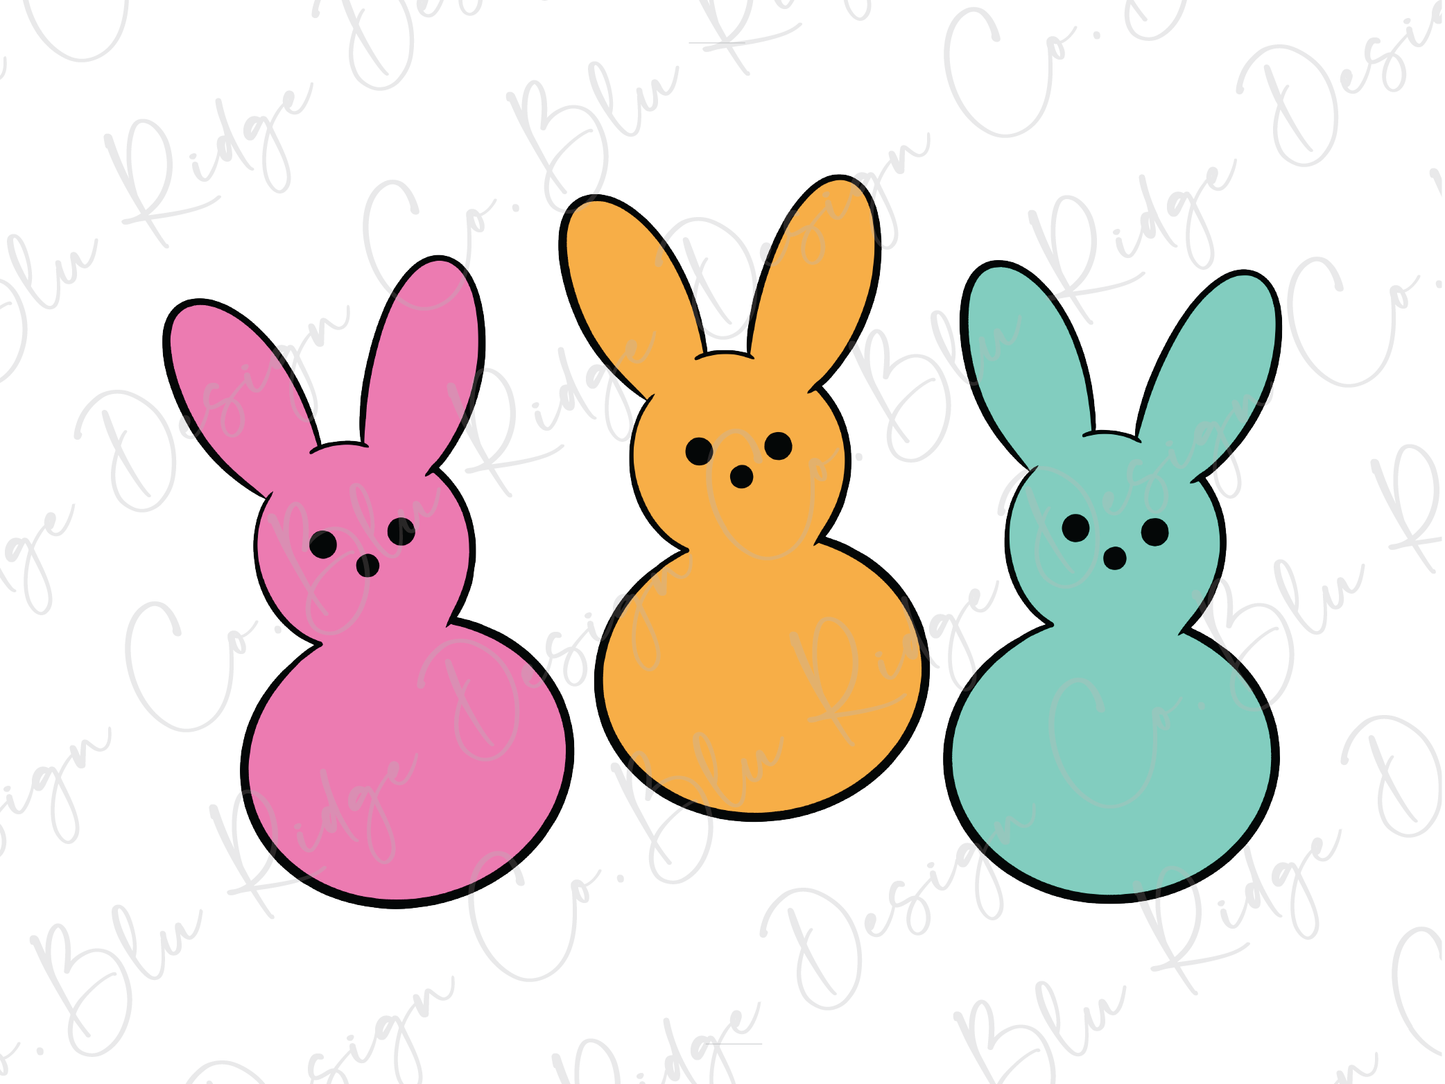 three bunnies in different colors on a white background